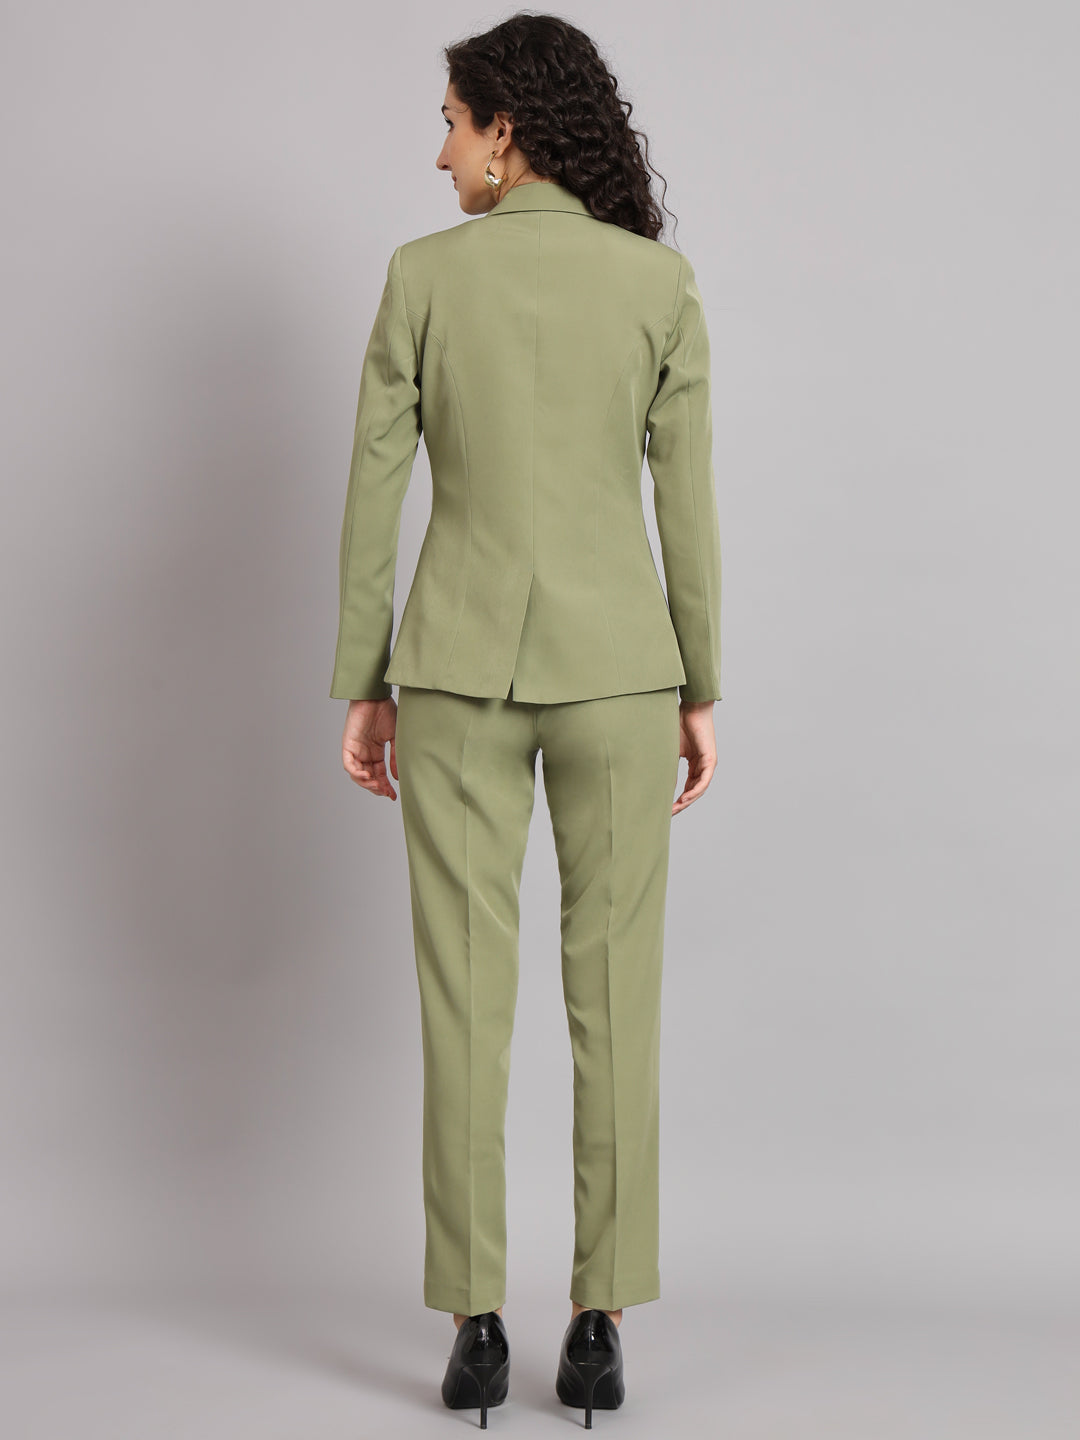 Notched Collar  Pant Suit - Olive Green